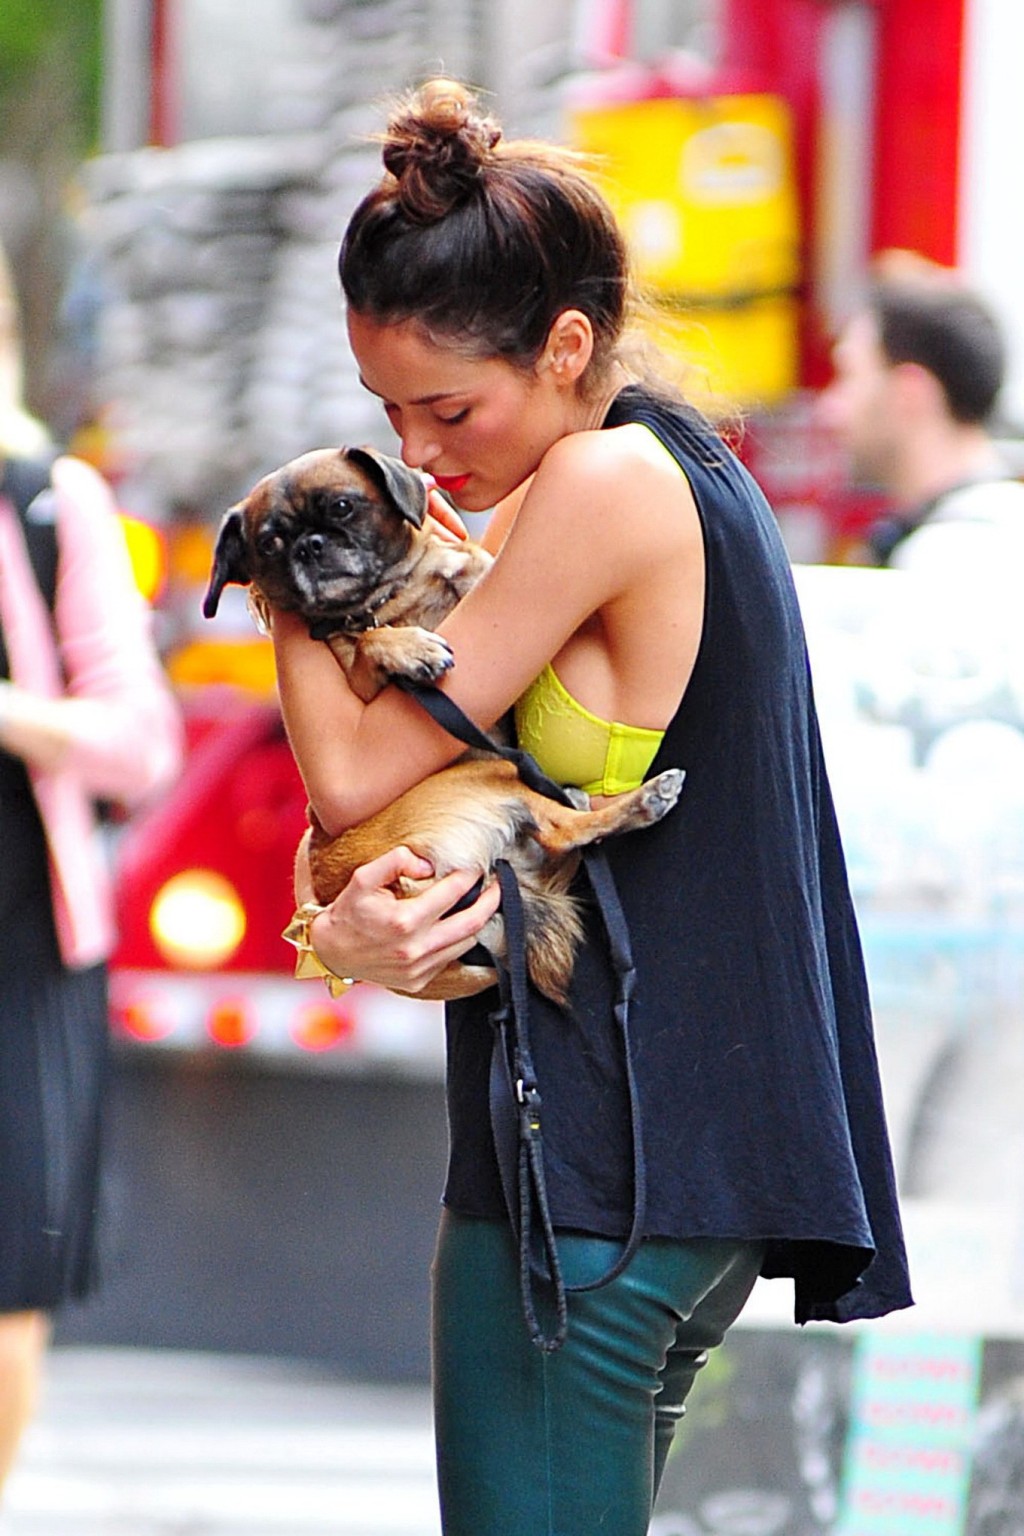 Nicole Trunfio bra peak while petting her doggy out in Soho #75250619